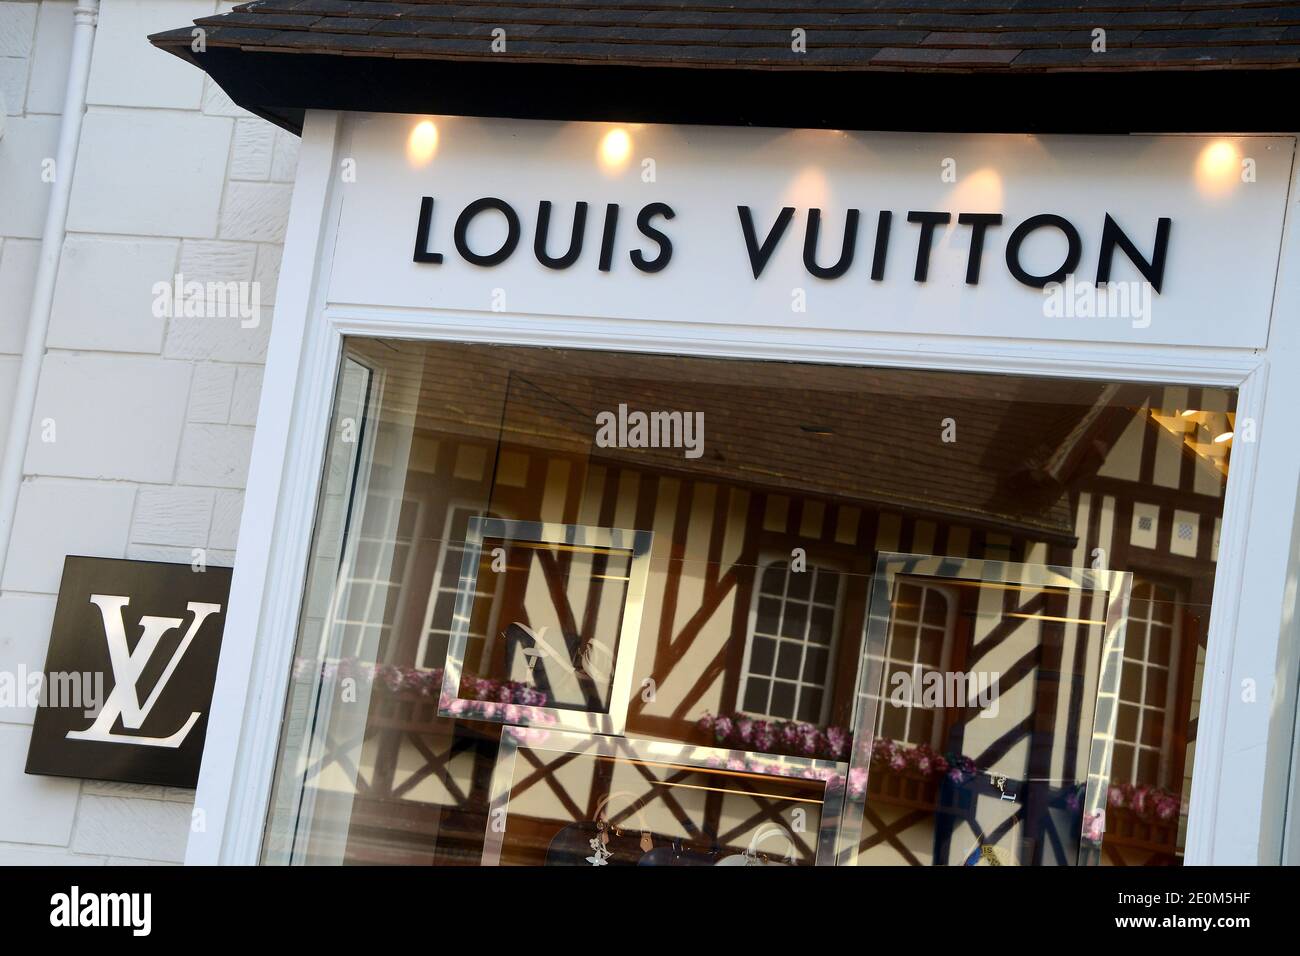 Illustration of Louis Vuitton (LVMH) shop in Deauville, France on